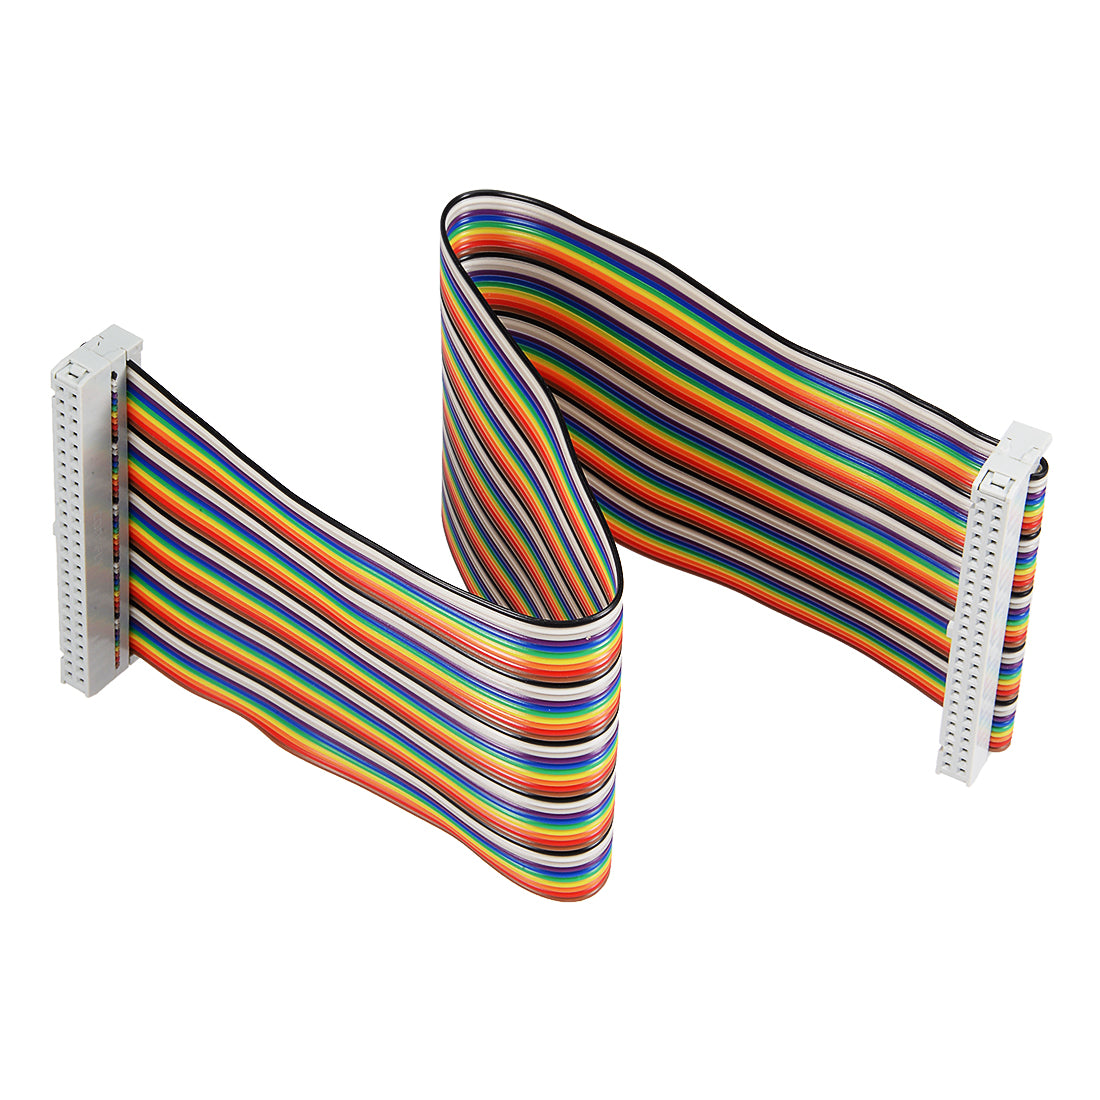 uxcell Uxcell IDC 50 Pins Wire Flat Multicolored Flexible Rainbow Ribbon Jumper Cable 30cm 2.54mm Pitch,1pcs